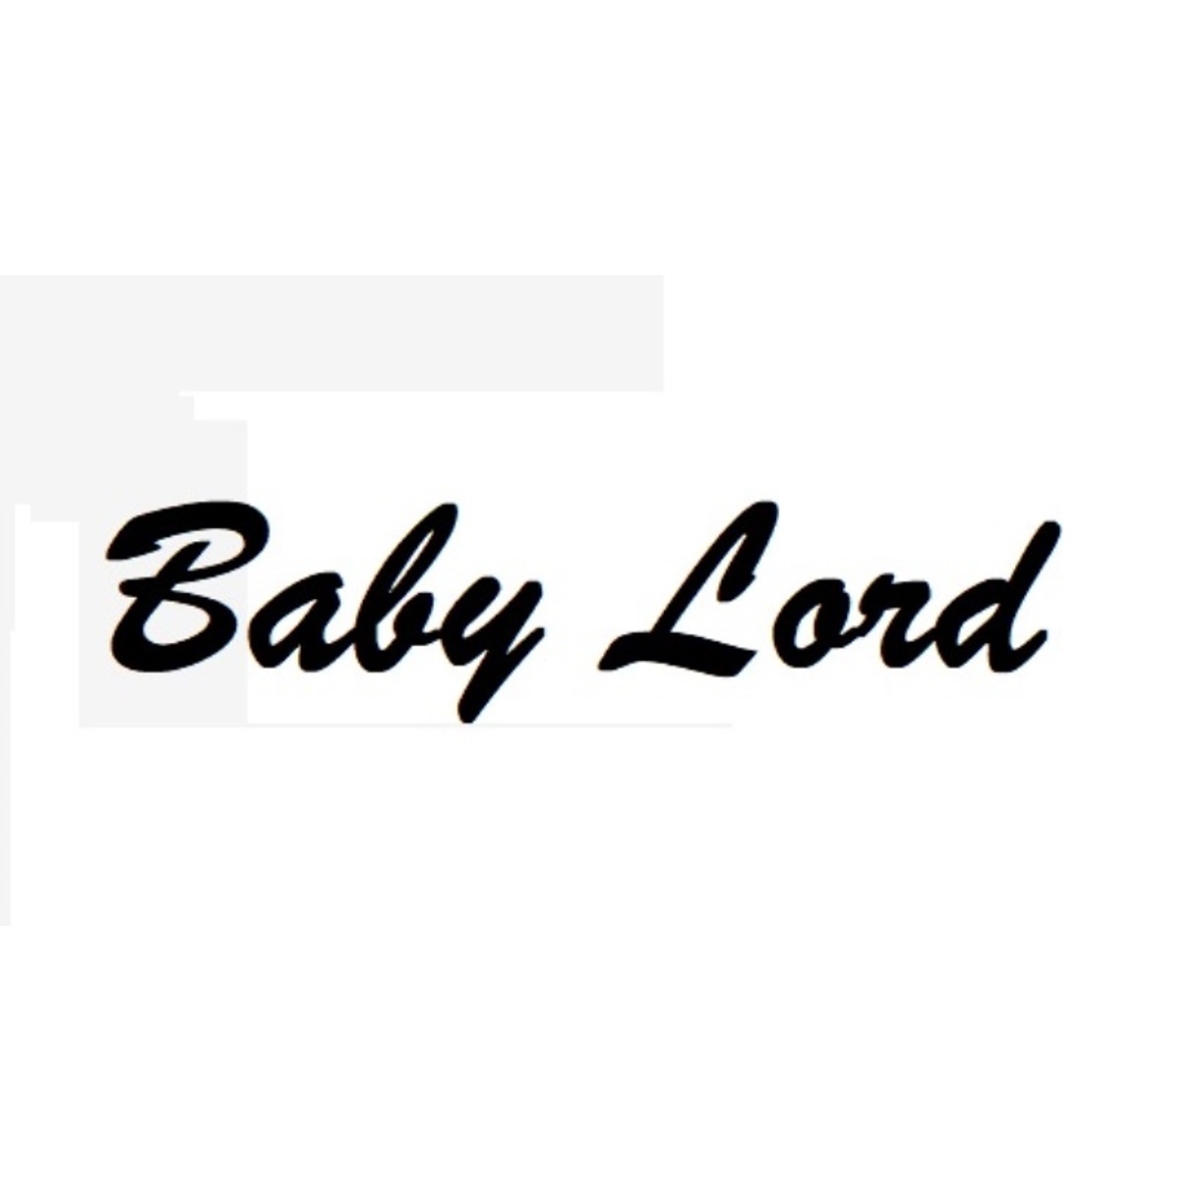 Baby lord